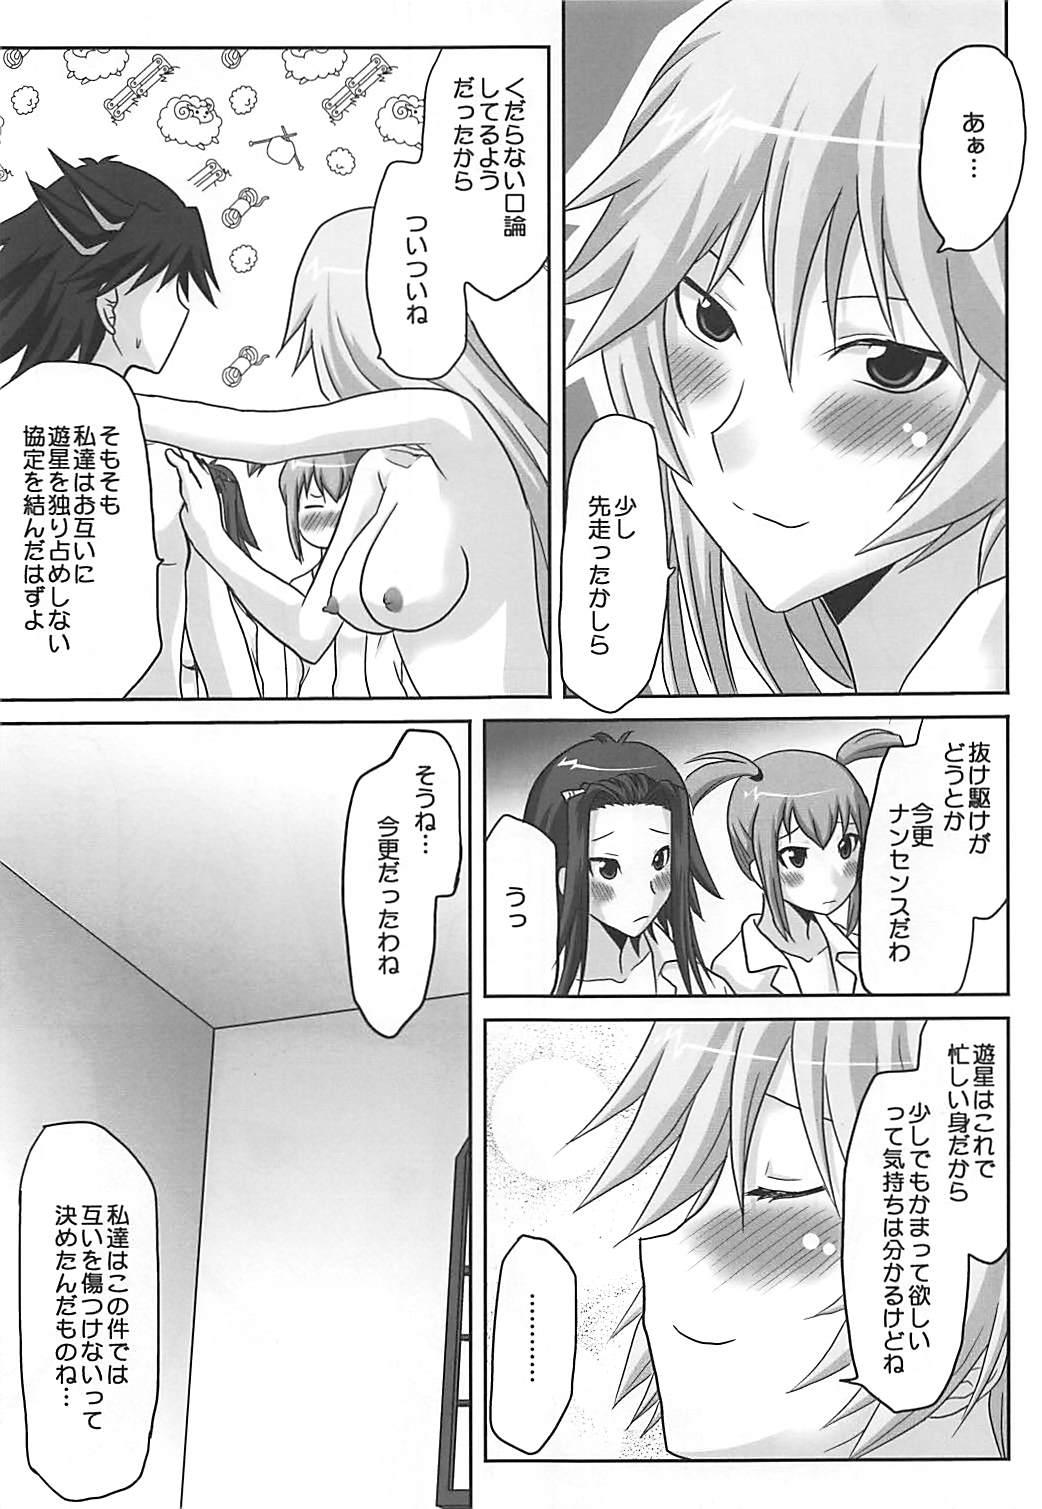 Longhair Omodume BOX XII - Yu-gi-oh 5ds Hairypussy - Page 6